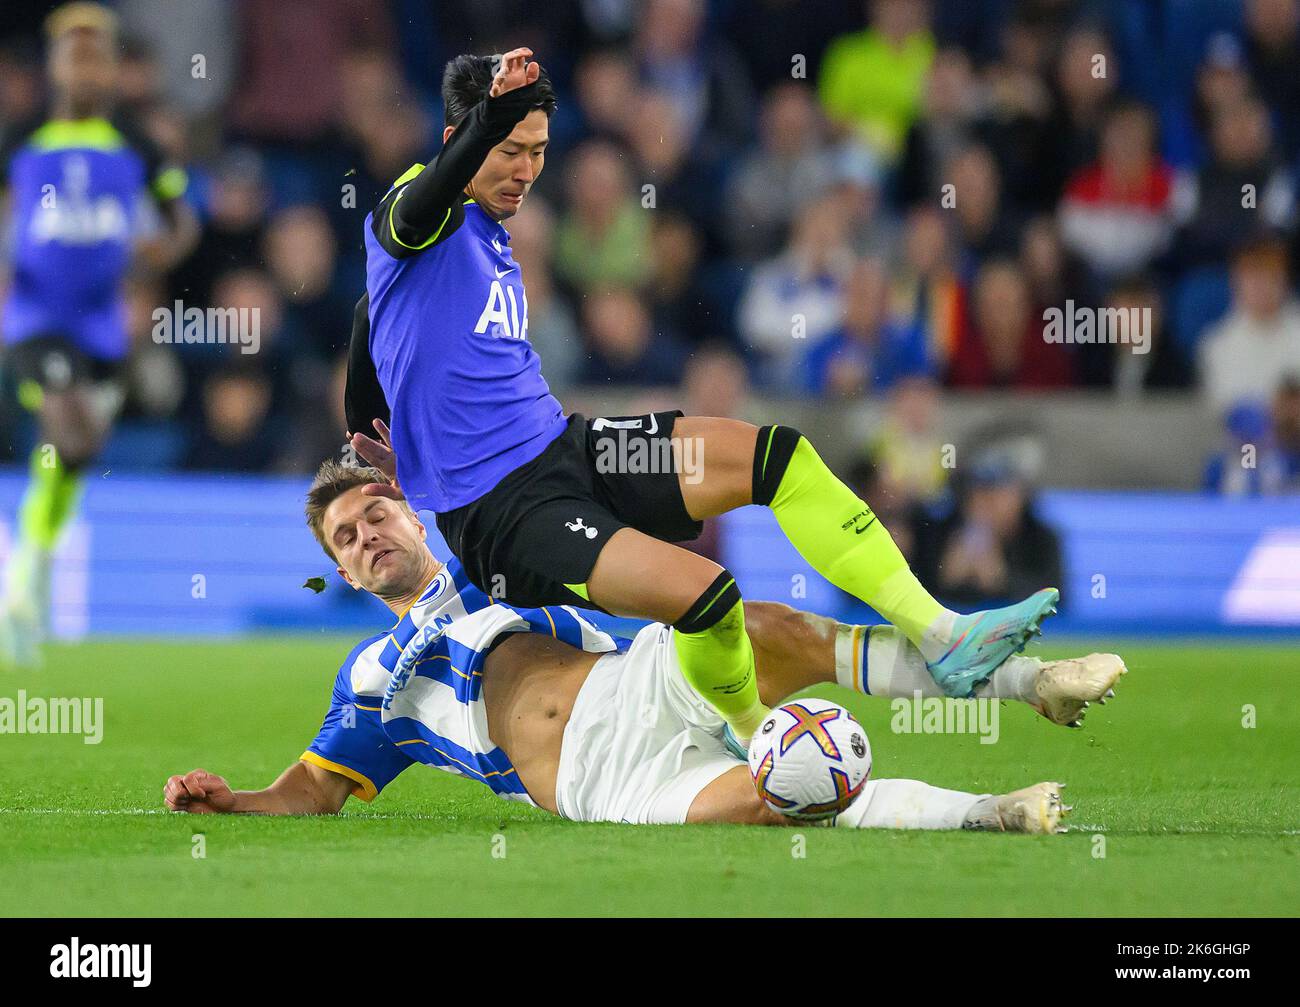 08 Oct 2022 - Brighton and Hove Albion v Tottenham Hotspur - Premier League - Amex Stadium  Tottenham's Heung-Min Son is tackled by Joël Veltman during the Premier League match at the Amex Stadium. Picture : Mark Pain / Alamy Live News Stock Photo